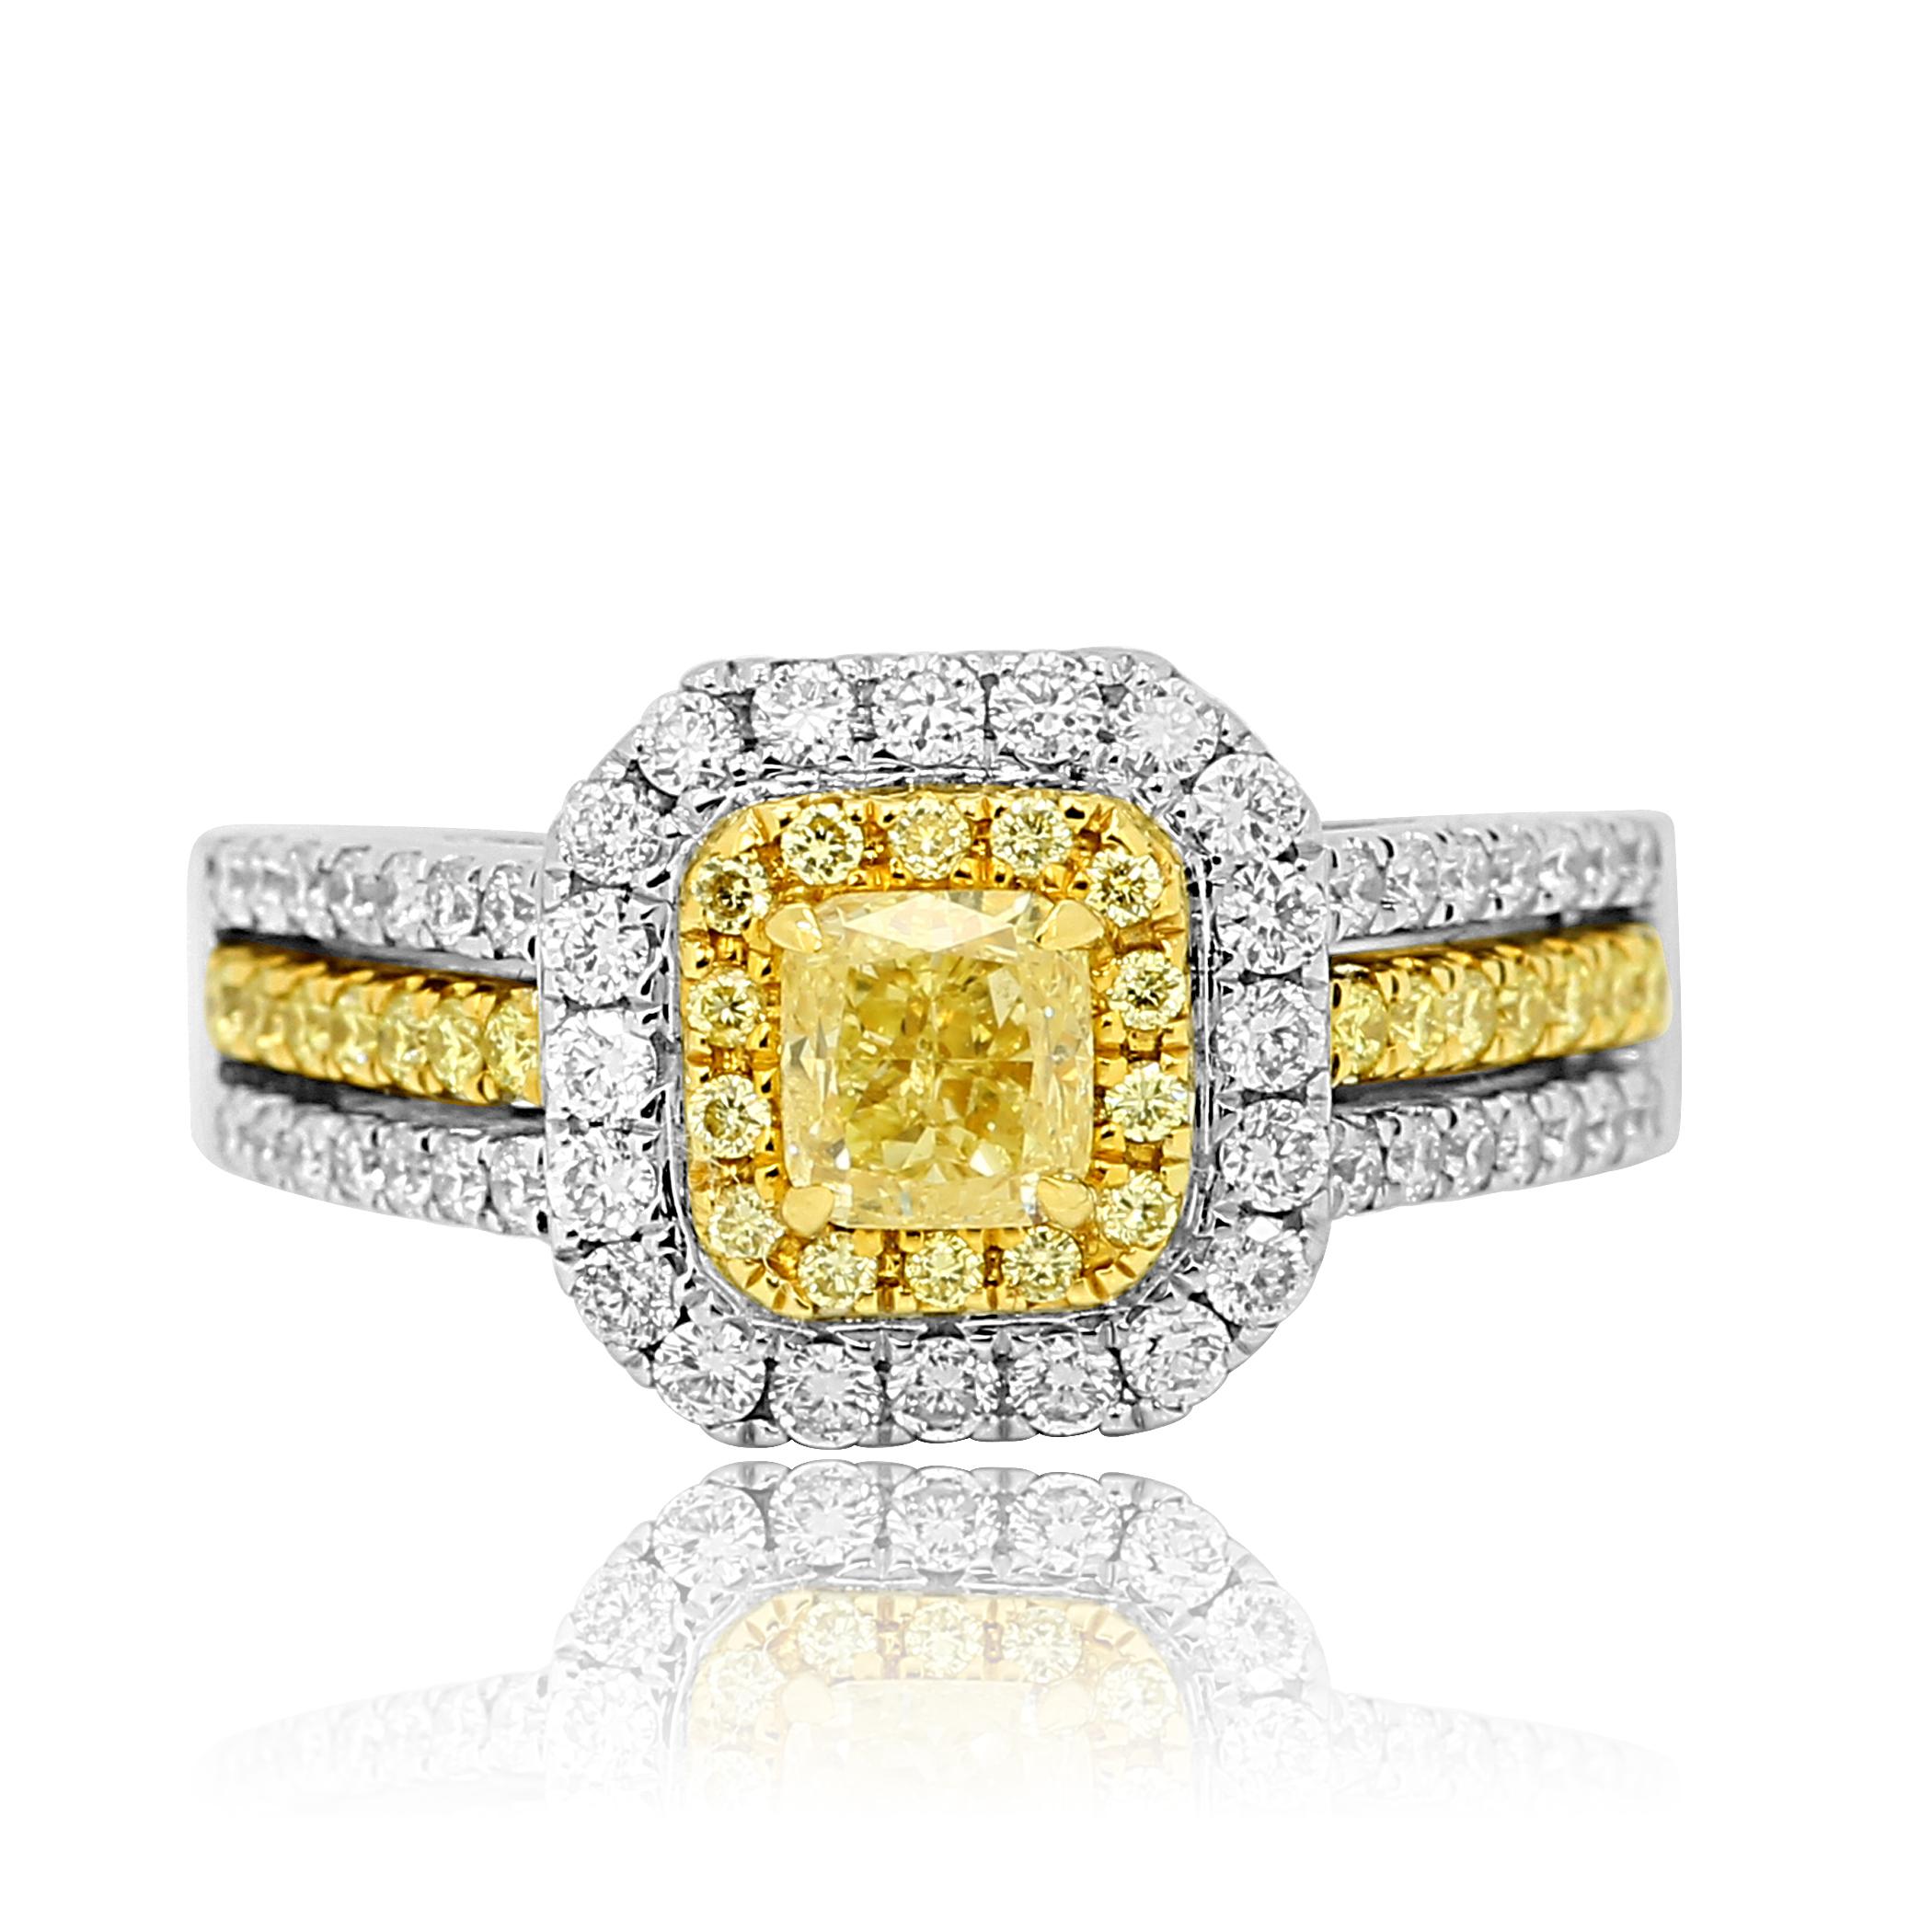 Natural Fancy Yellow Cushion 0.58 Carat Encircled i a Double Halo of Natural Fancy Yellow Round Diamonds 0.44 Carat and White Round Diamonds 0.58 Carat in 18K White and Yellow Gold RIng with Three Row Shank.

Style available in different price